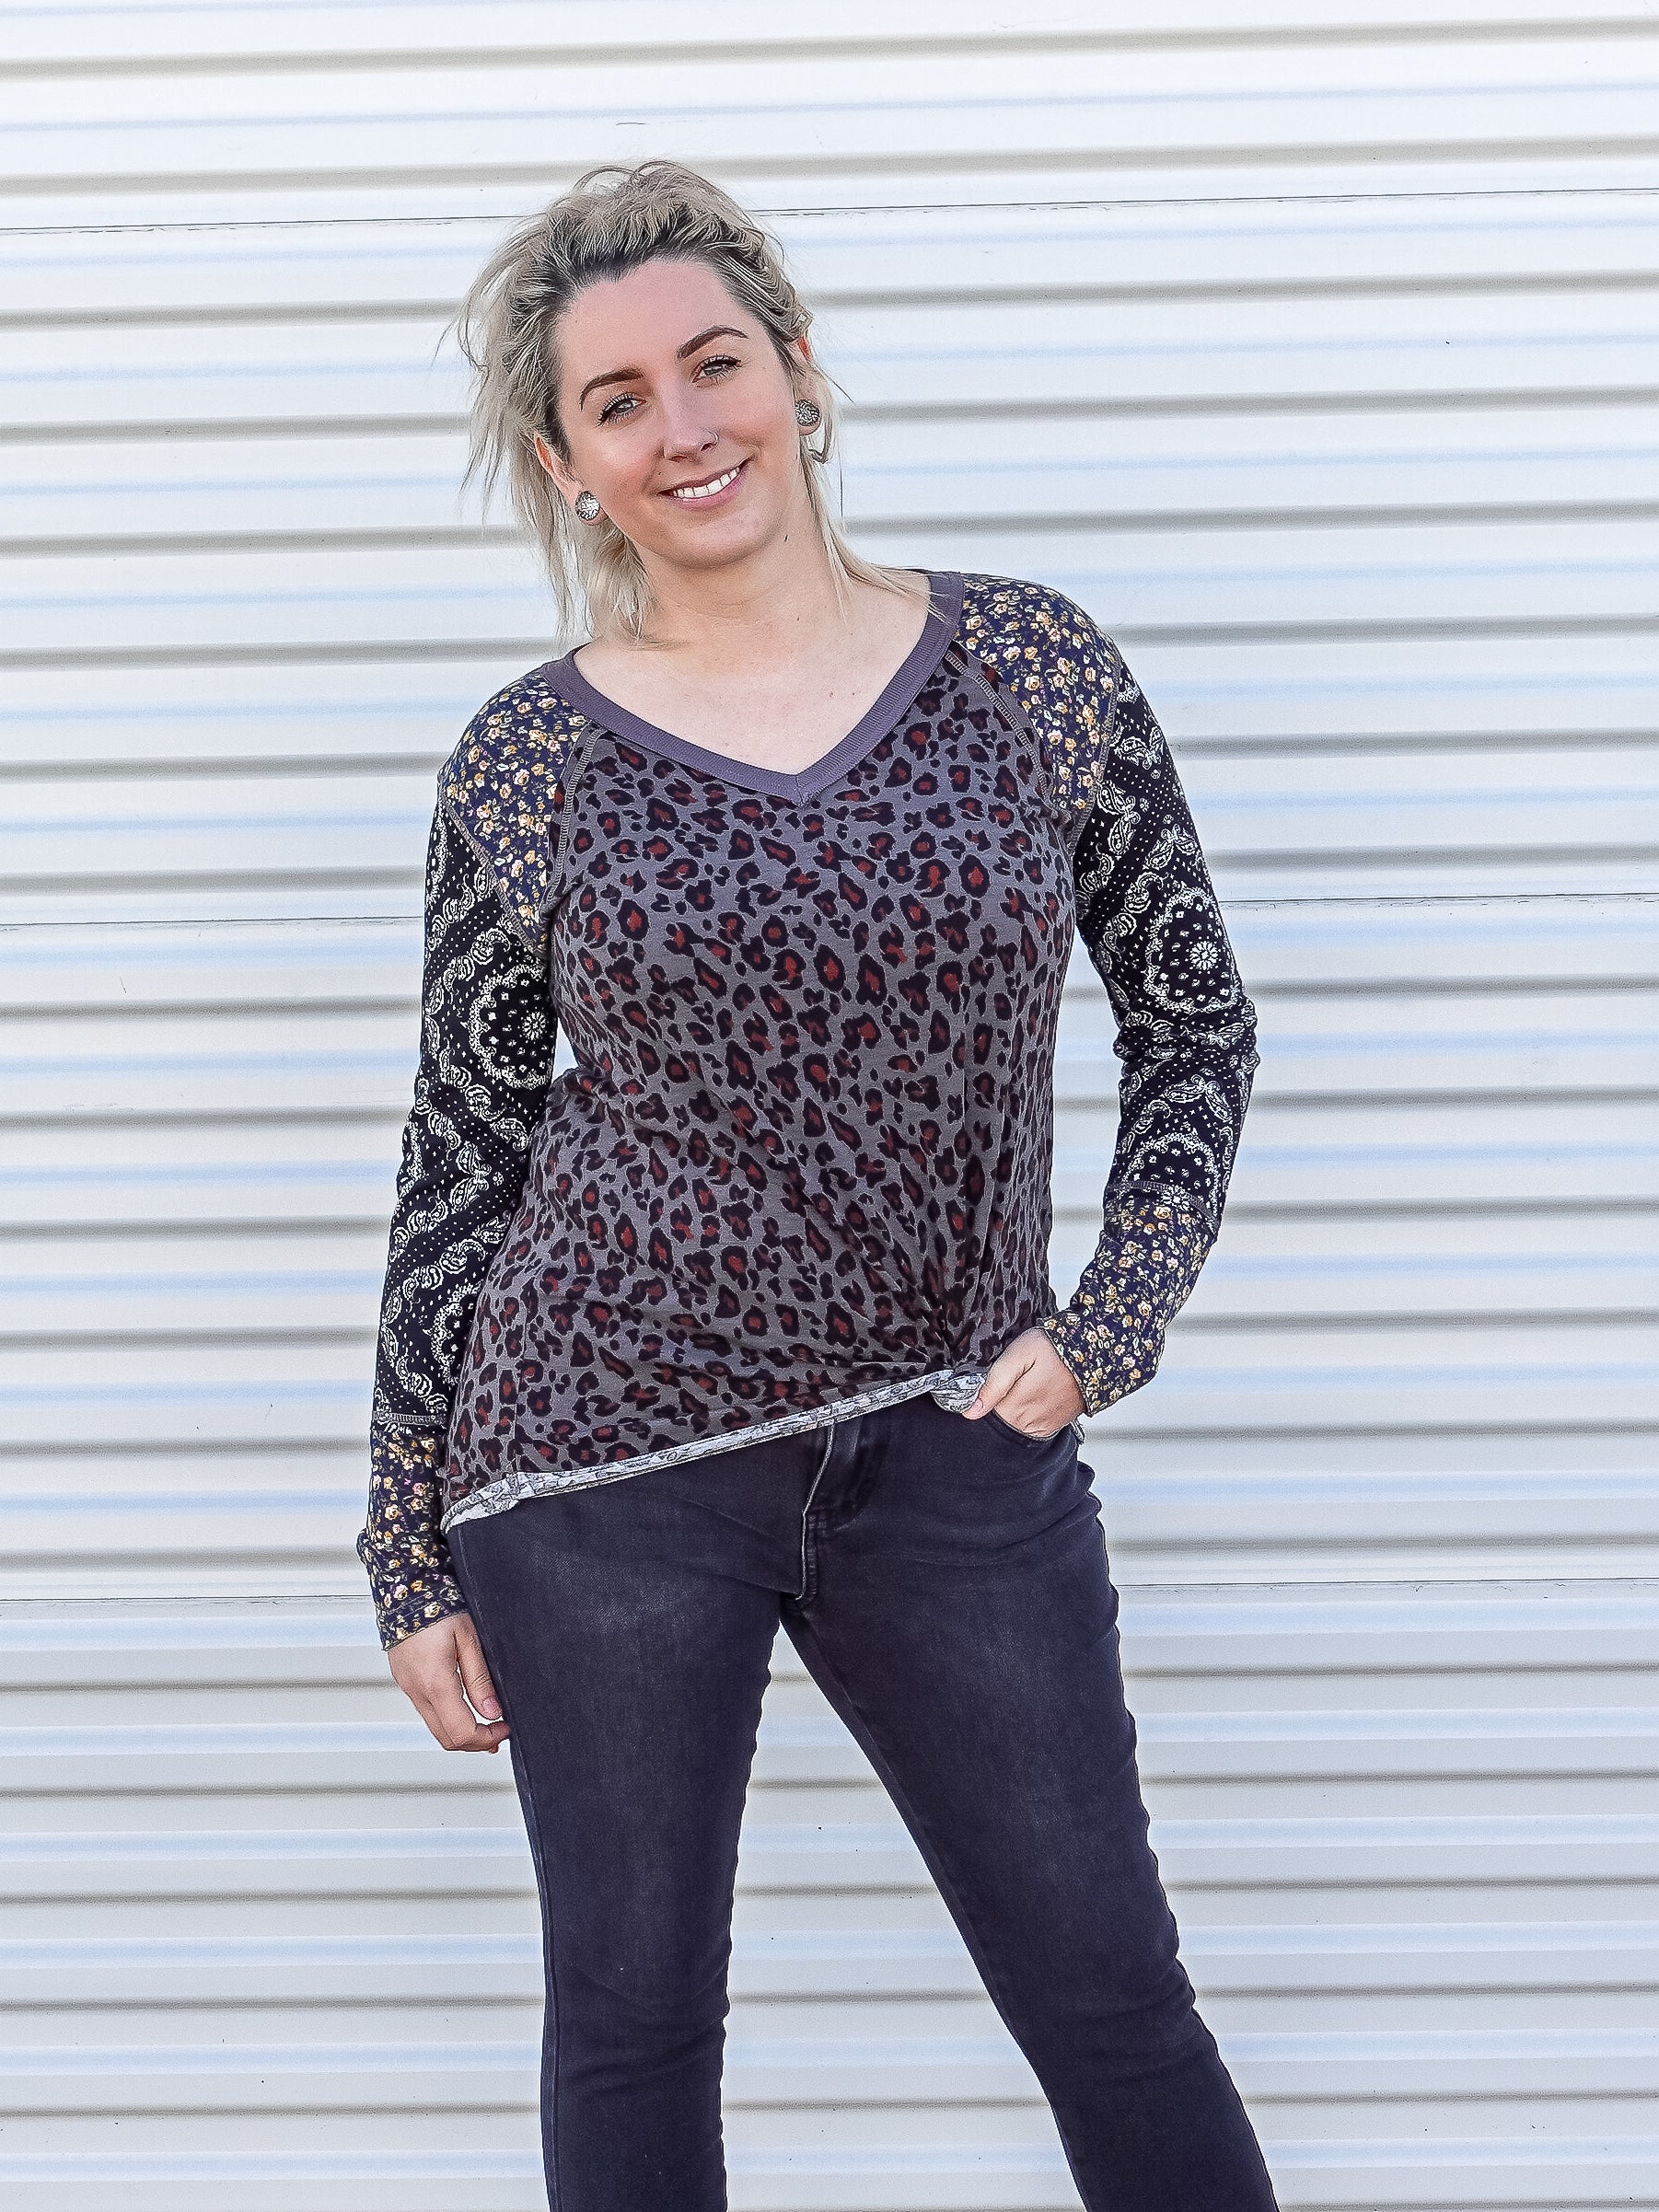 Three patterned long sleeve with leopard, paisley and  floral patterns.